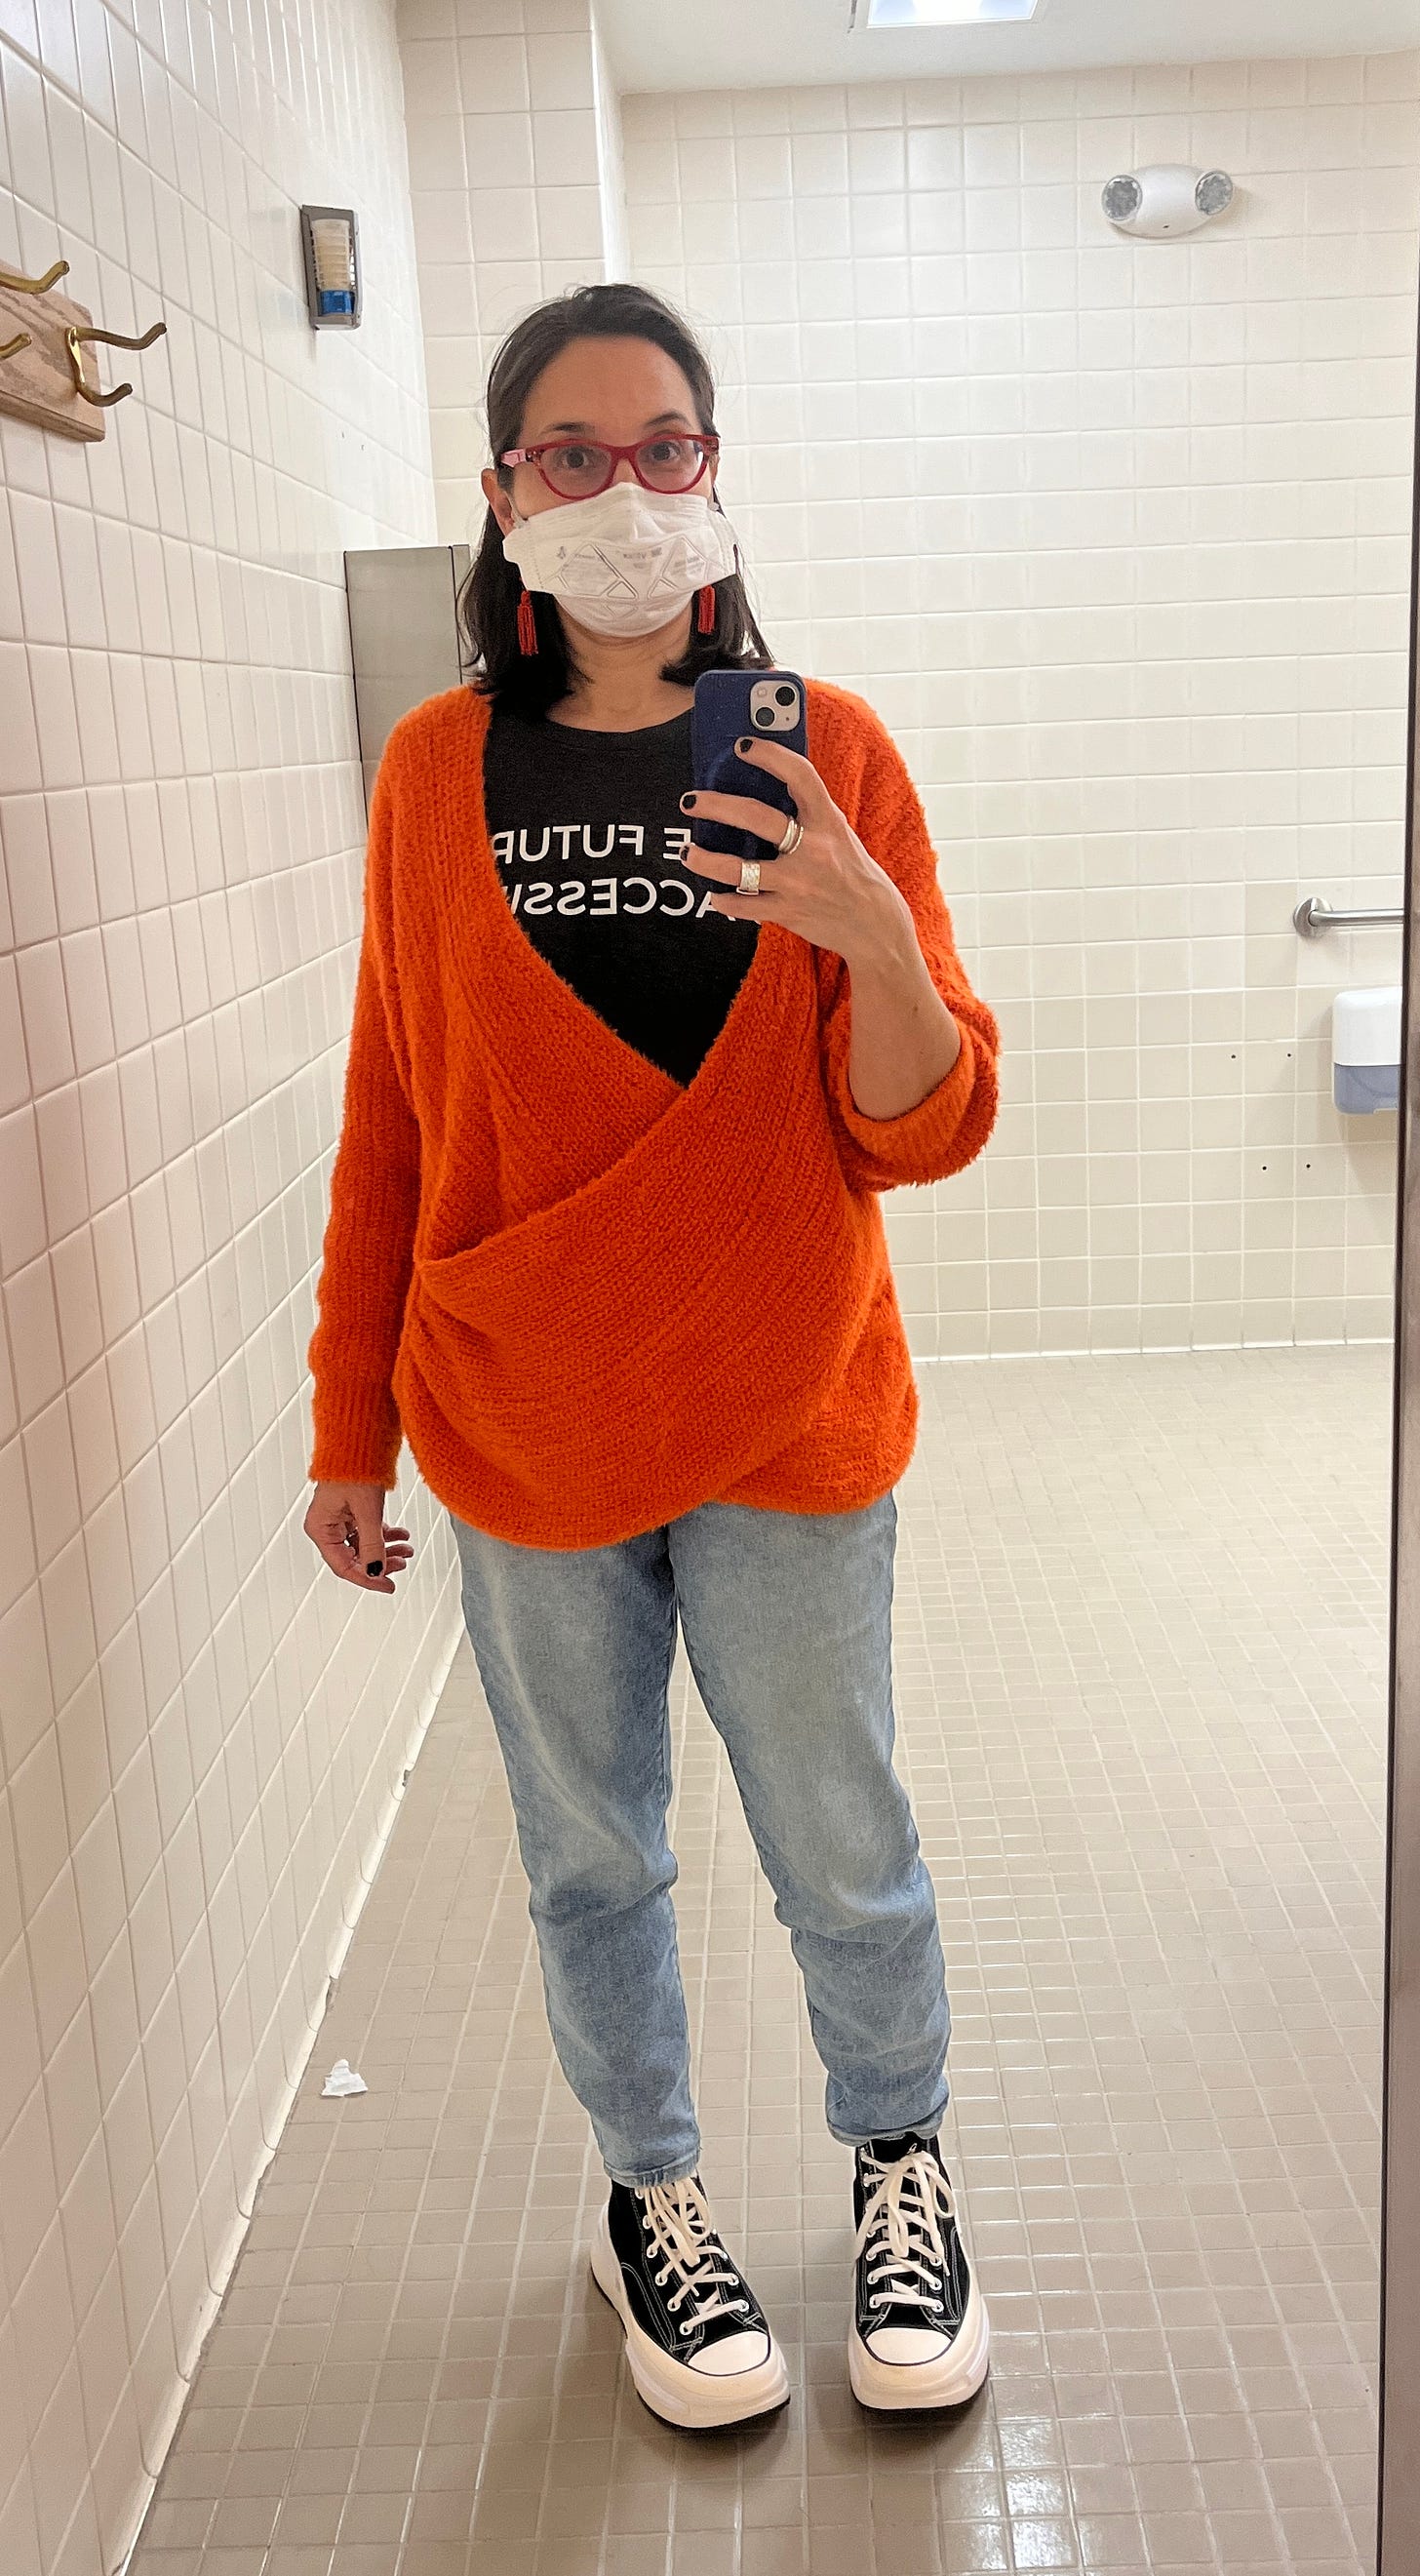 Me, brown shoulder length hair, taking a selfie in a mirror at work, dangly orange earrings, a bright orange sweater, a mask, jeans, and black converse with thick soles. 